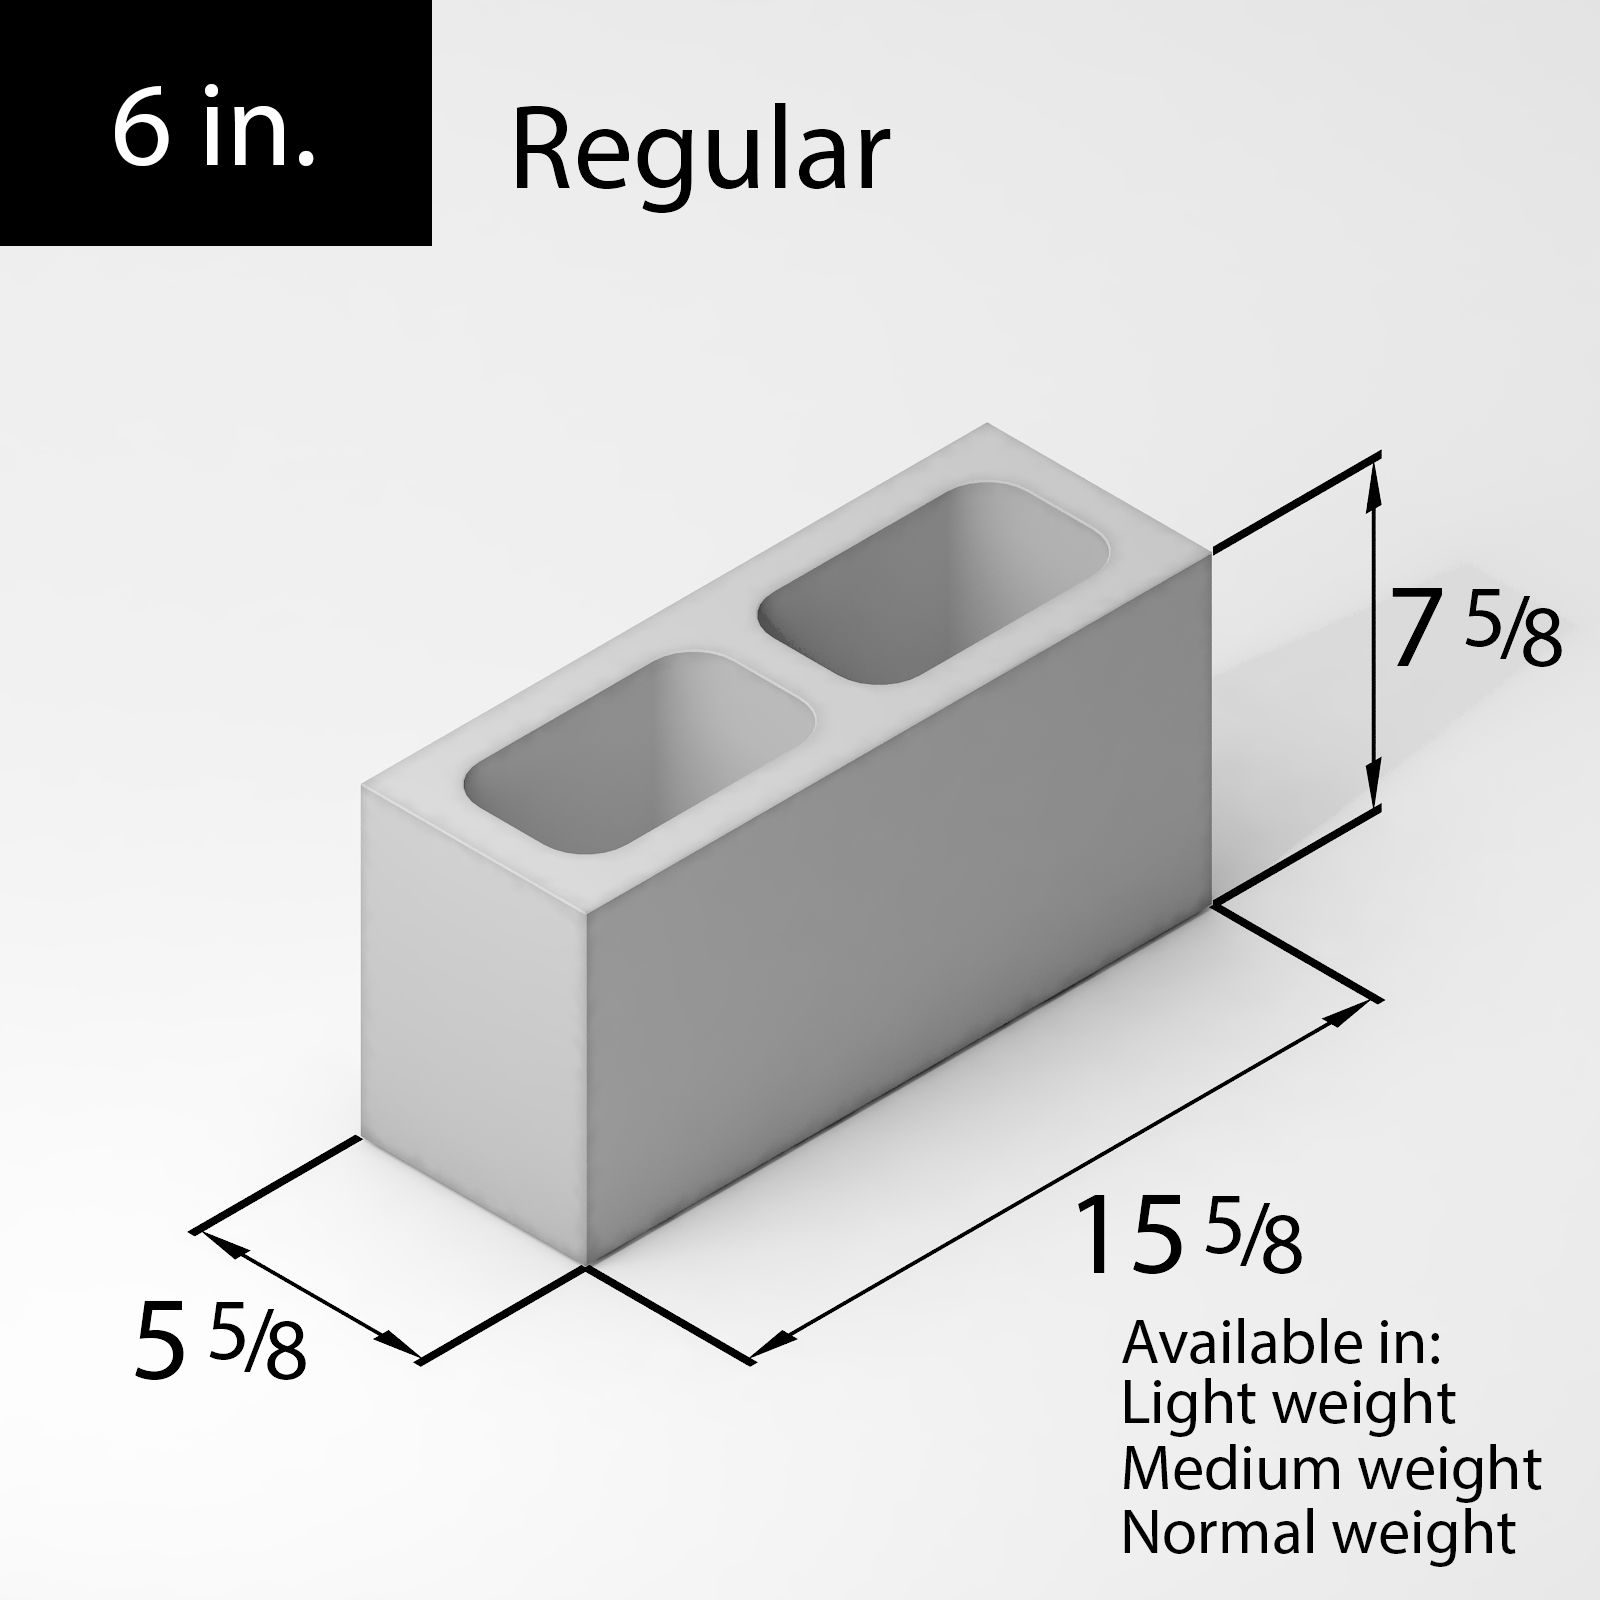 type of standard concrete block. learn to lay concrete block